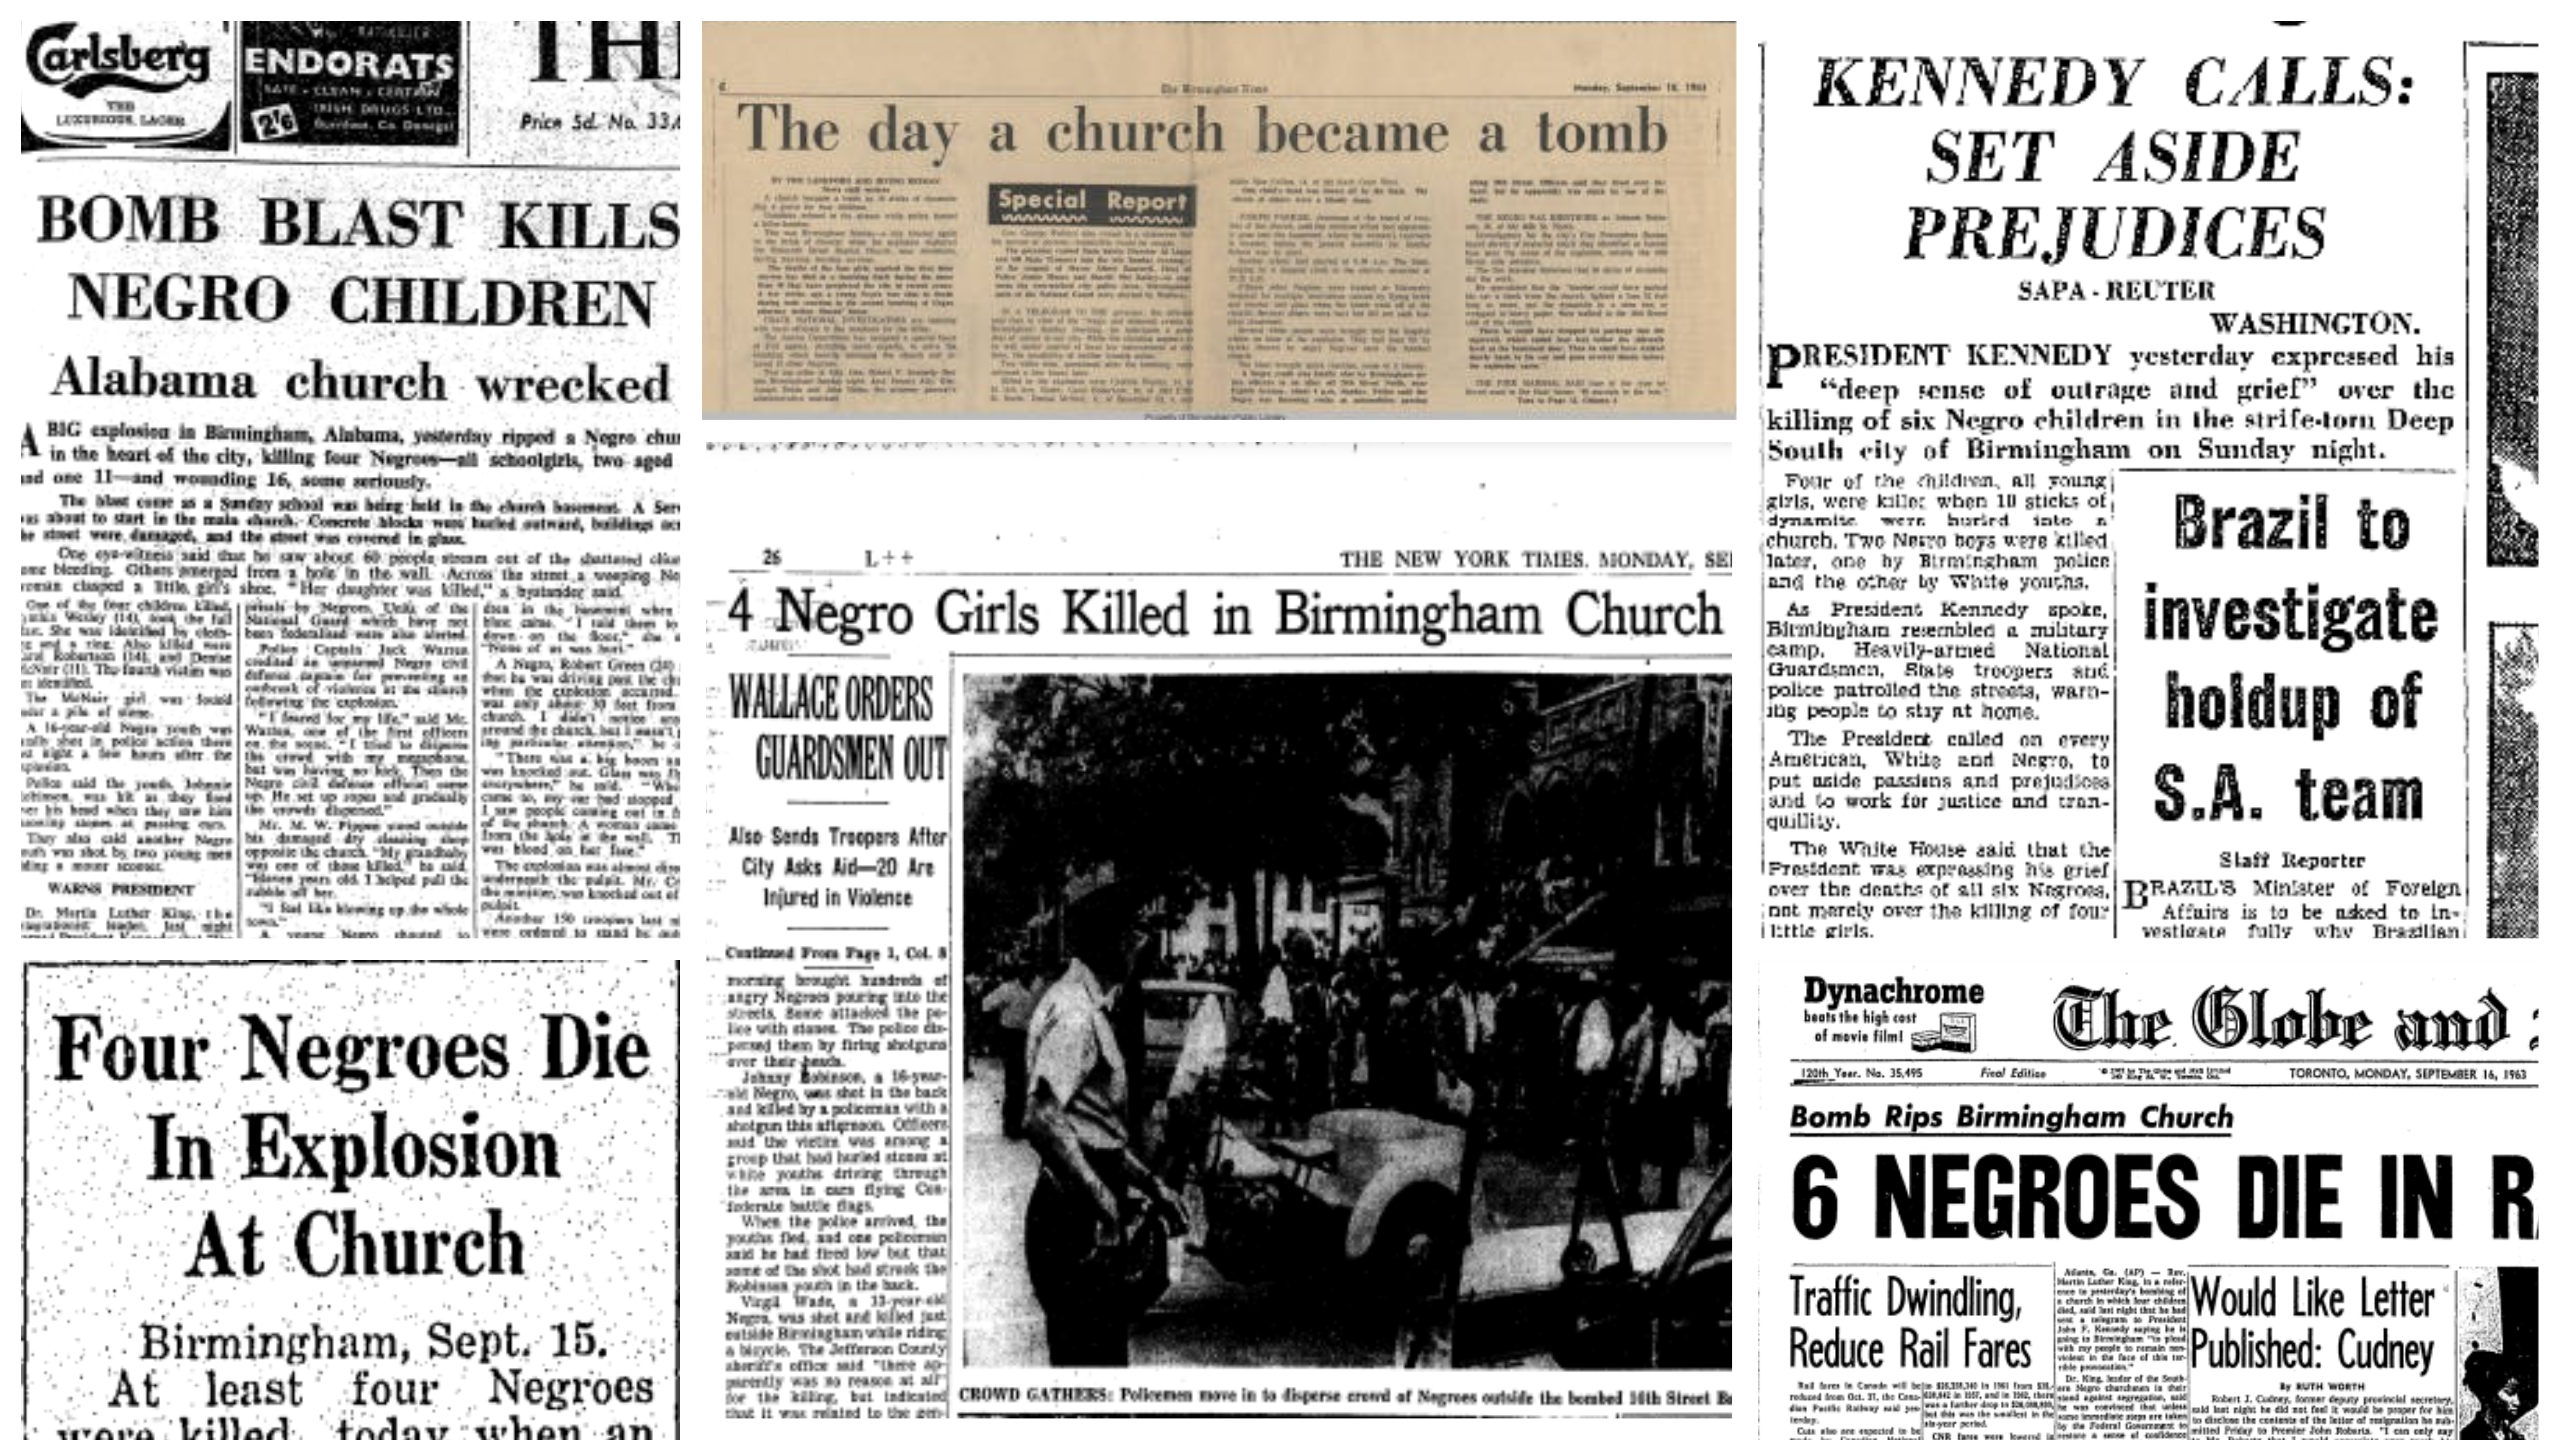 Collage of newspaper articles from September 15, 1963